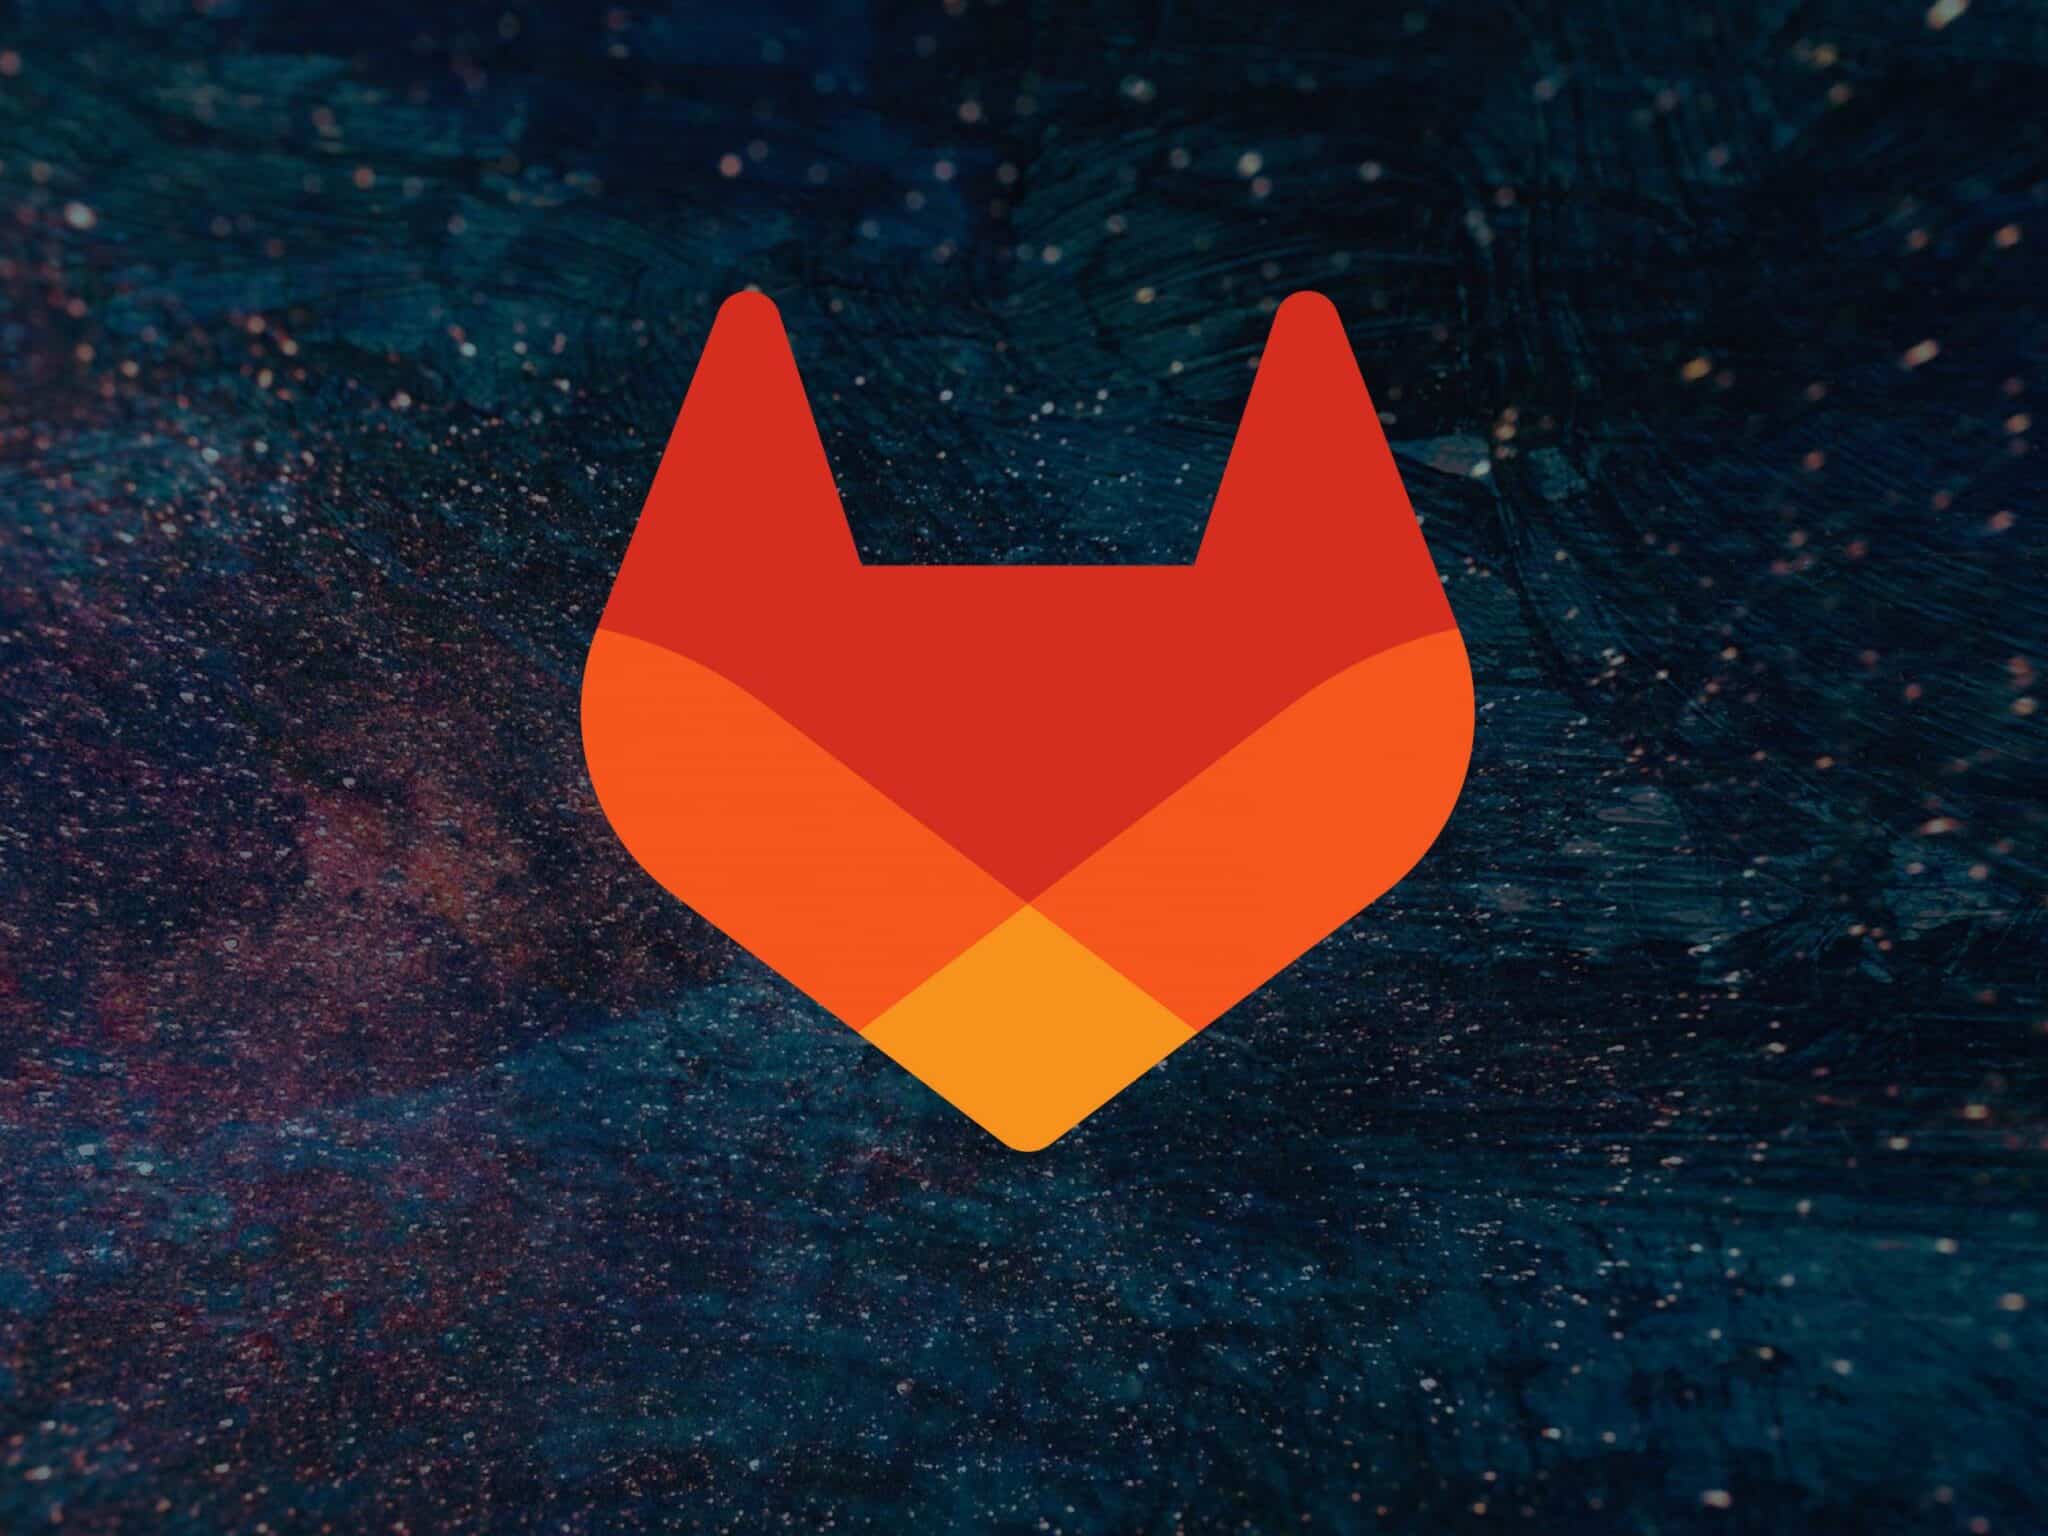 Critical GitLab flaw allows account takeover without user interaction, patch quickly! (CVE-2023-7028)